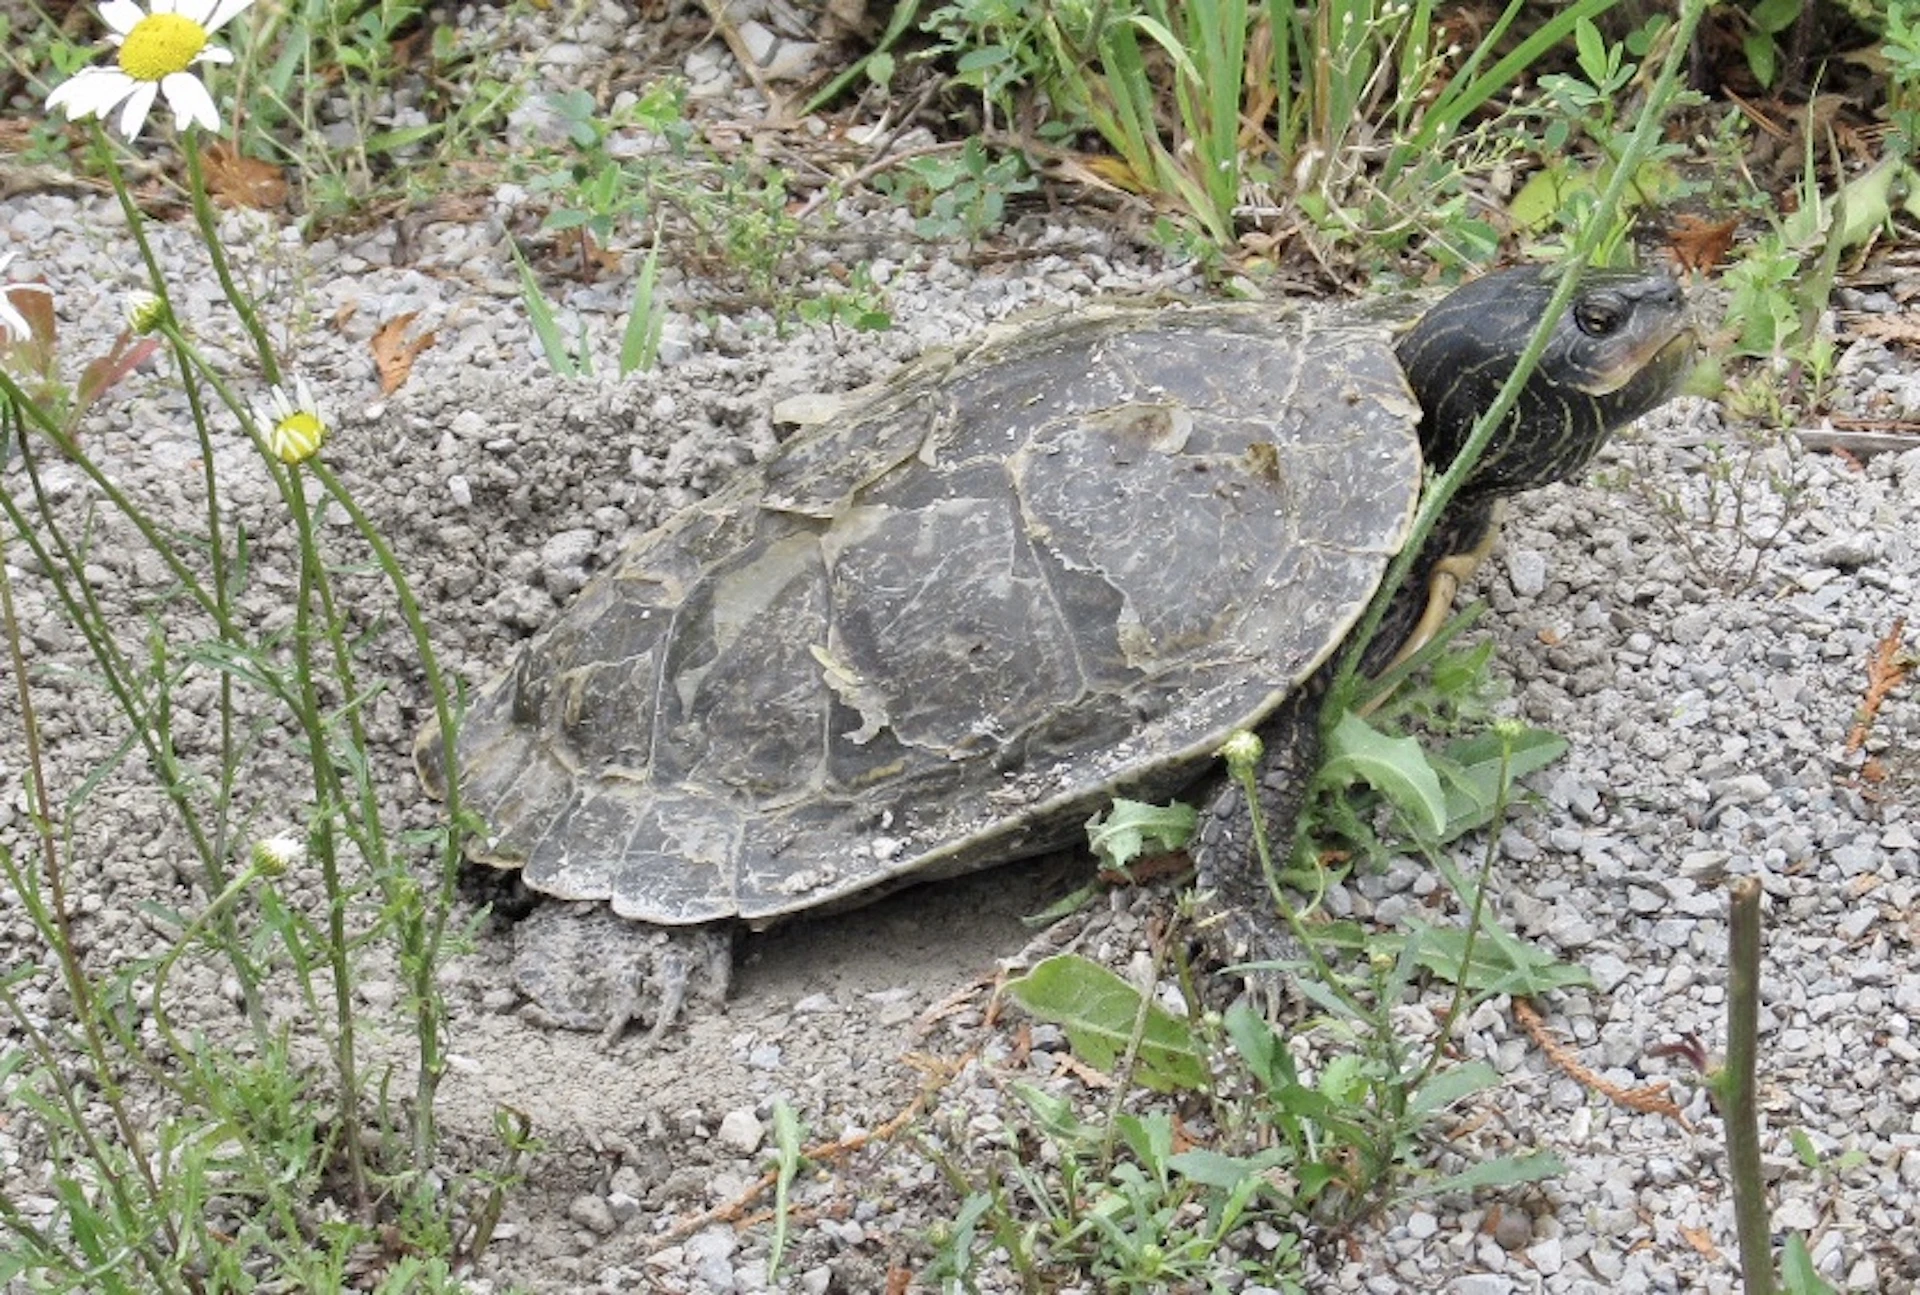 How we can help Canada's at-risk turtles survive and thrive